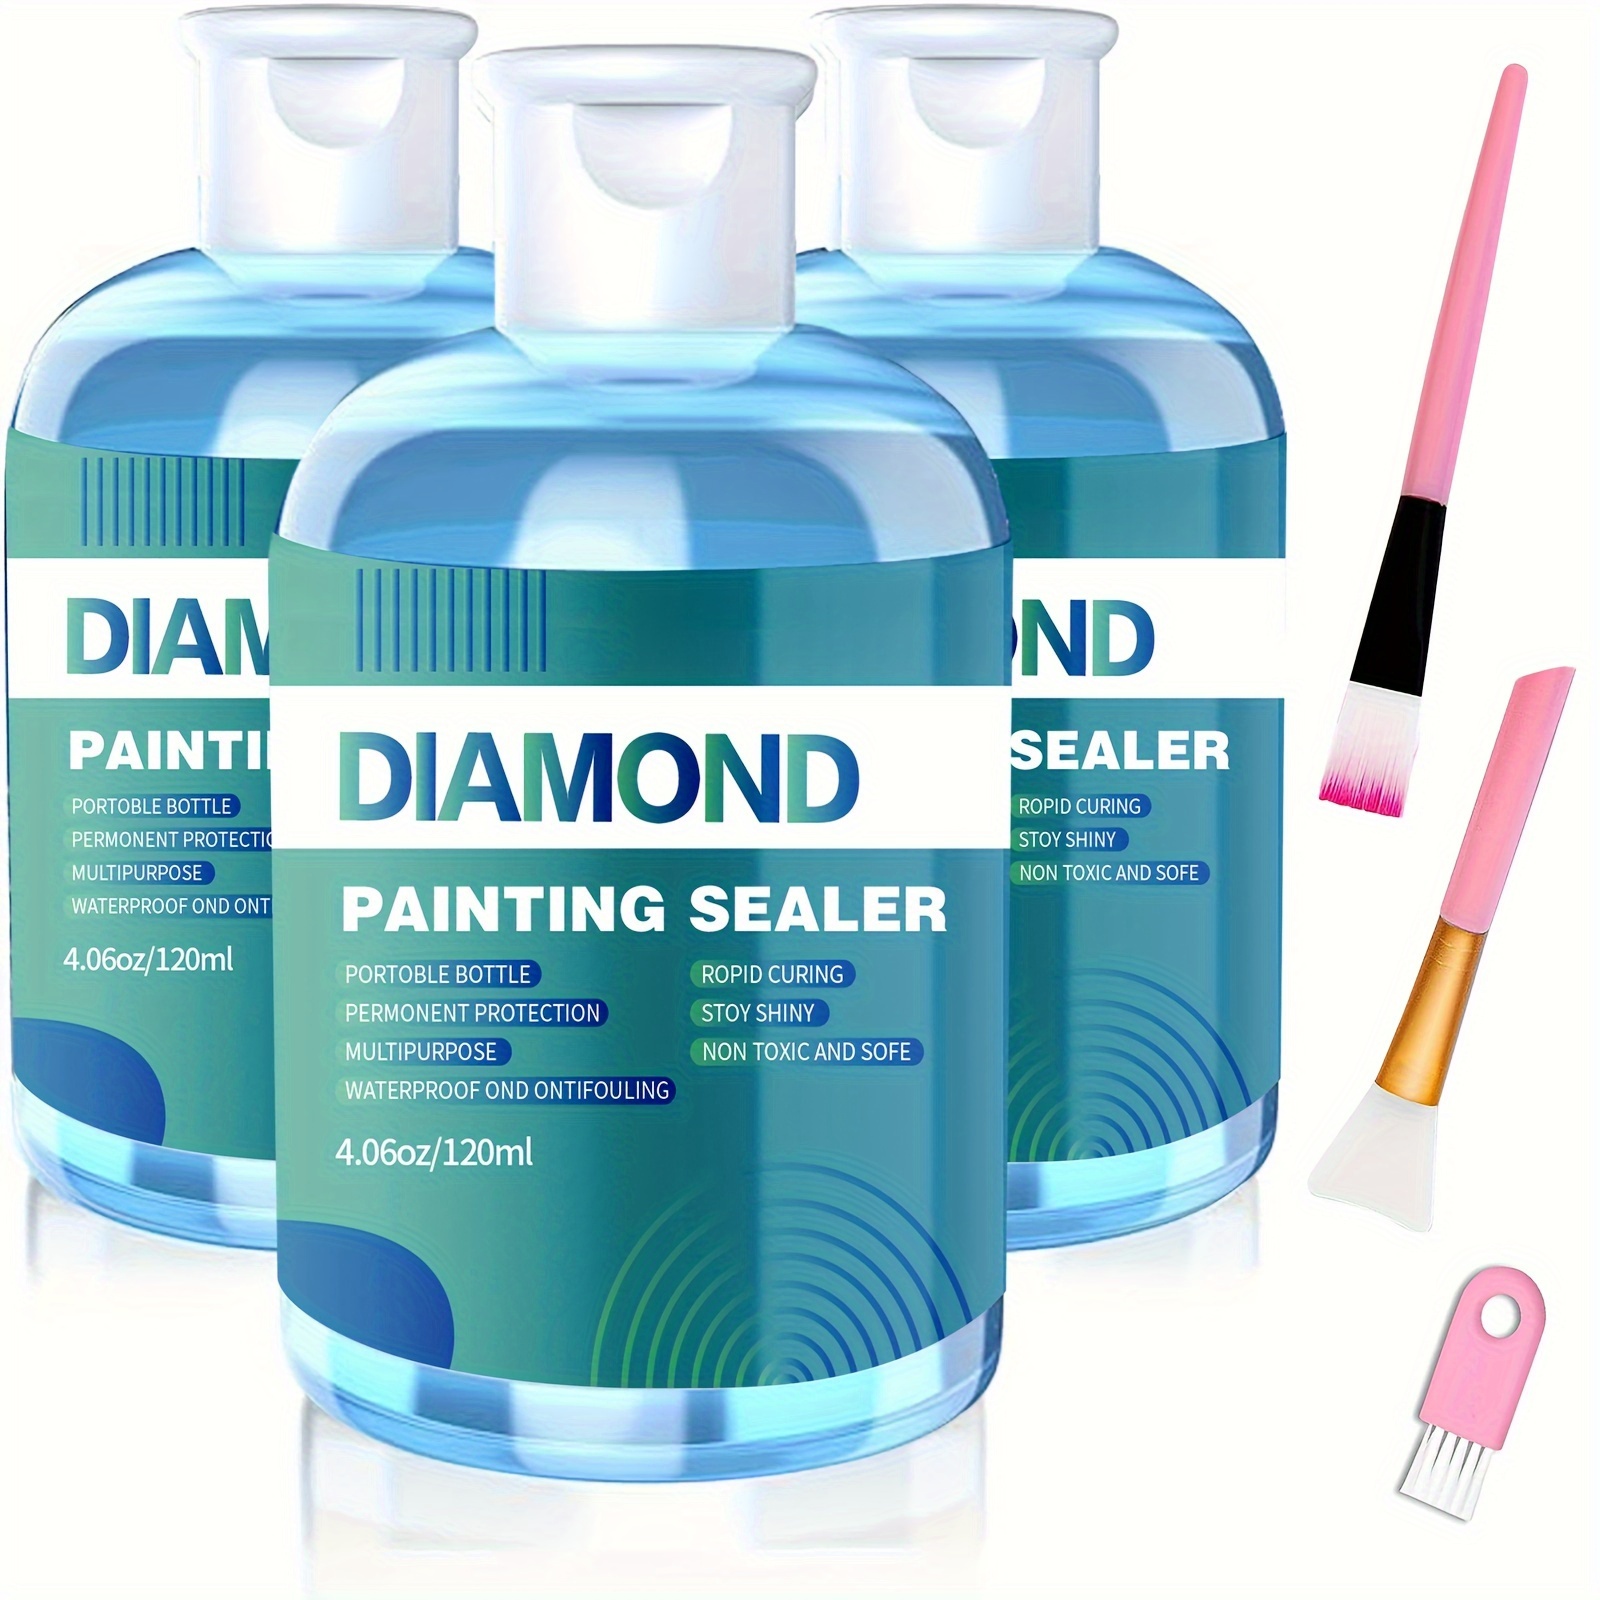 

Diamond Painting Sealer Kits 120ml With 3pcs Brushes, Diamond Art Sealer Puzzle Glue Diamond Painting Accessories And Tools For Adults (4oz)